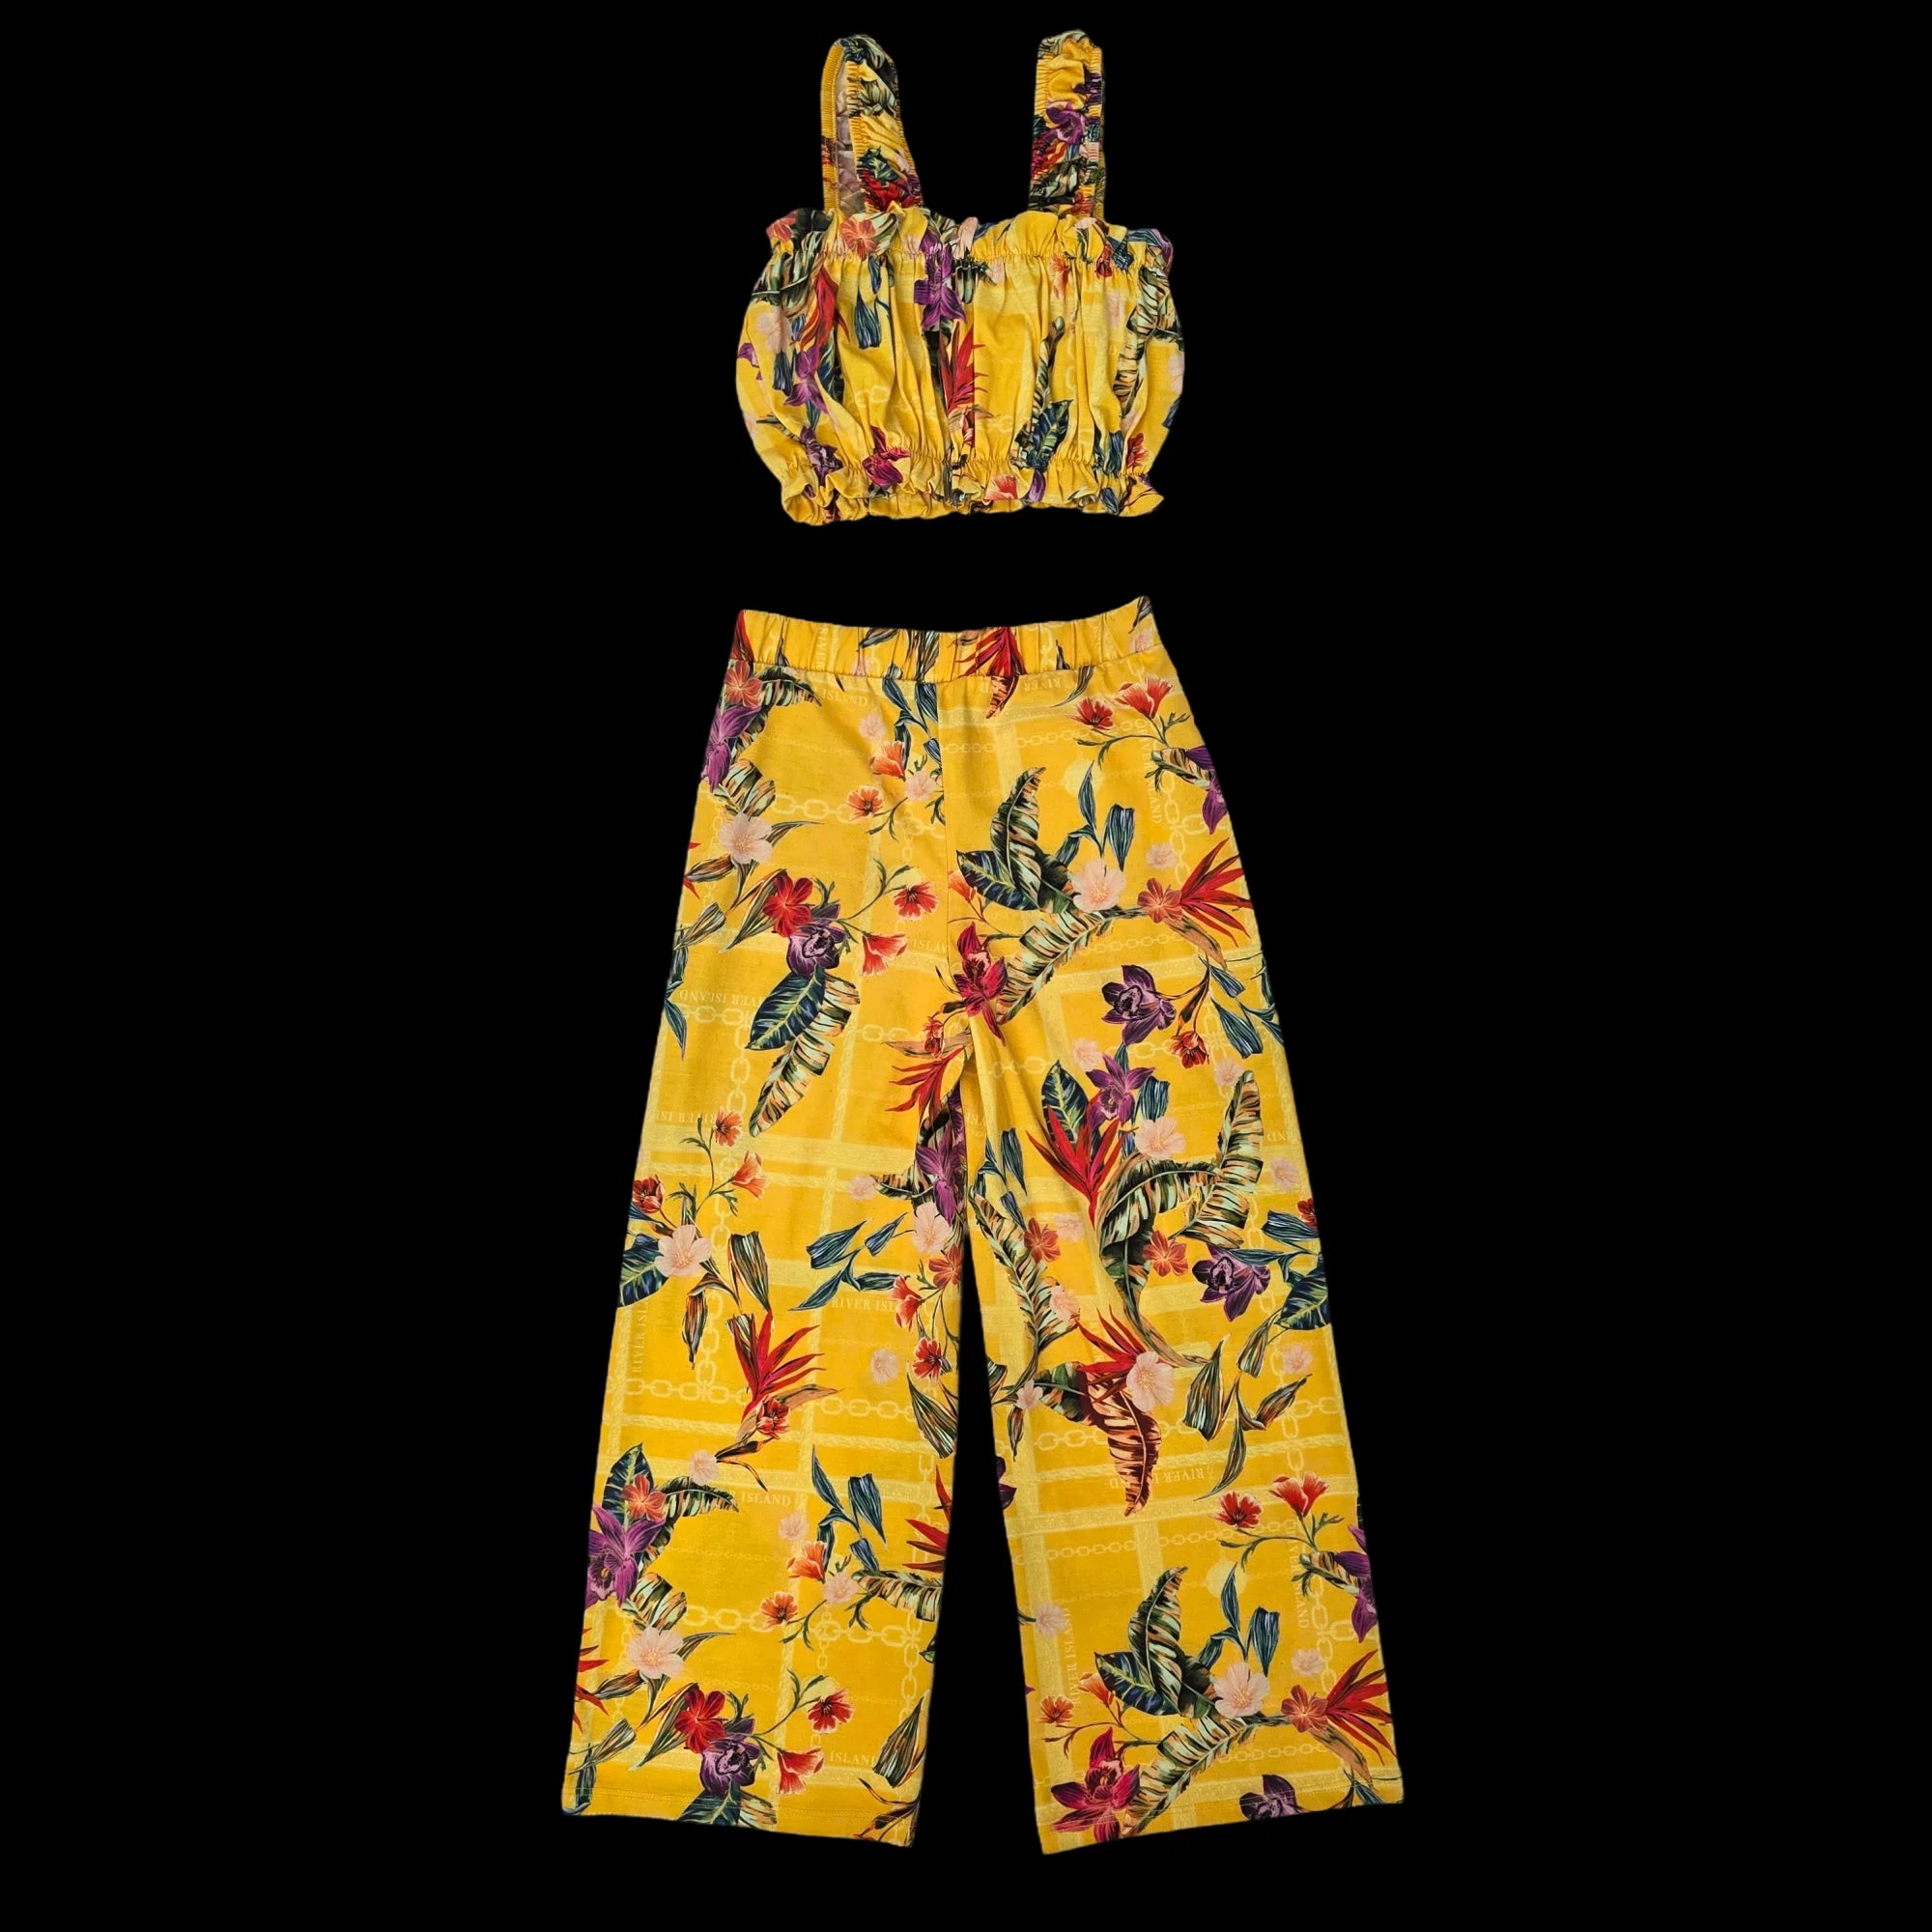 Girls River Island Floral Outfit 7-8 Years - Trousers - 1